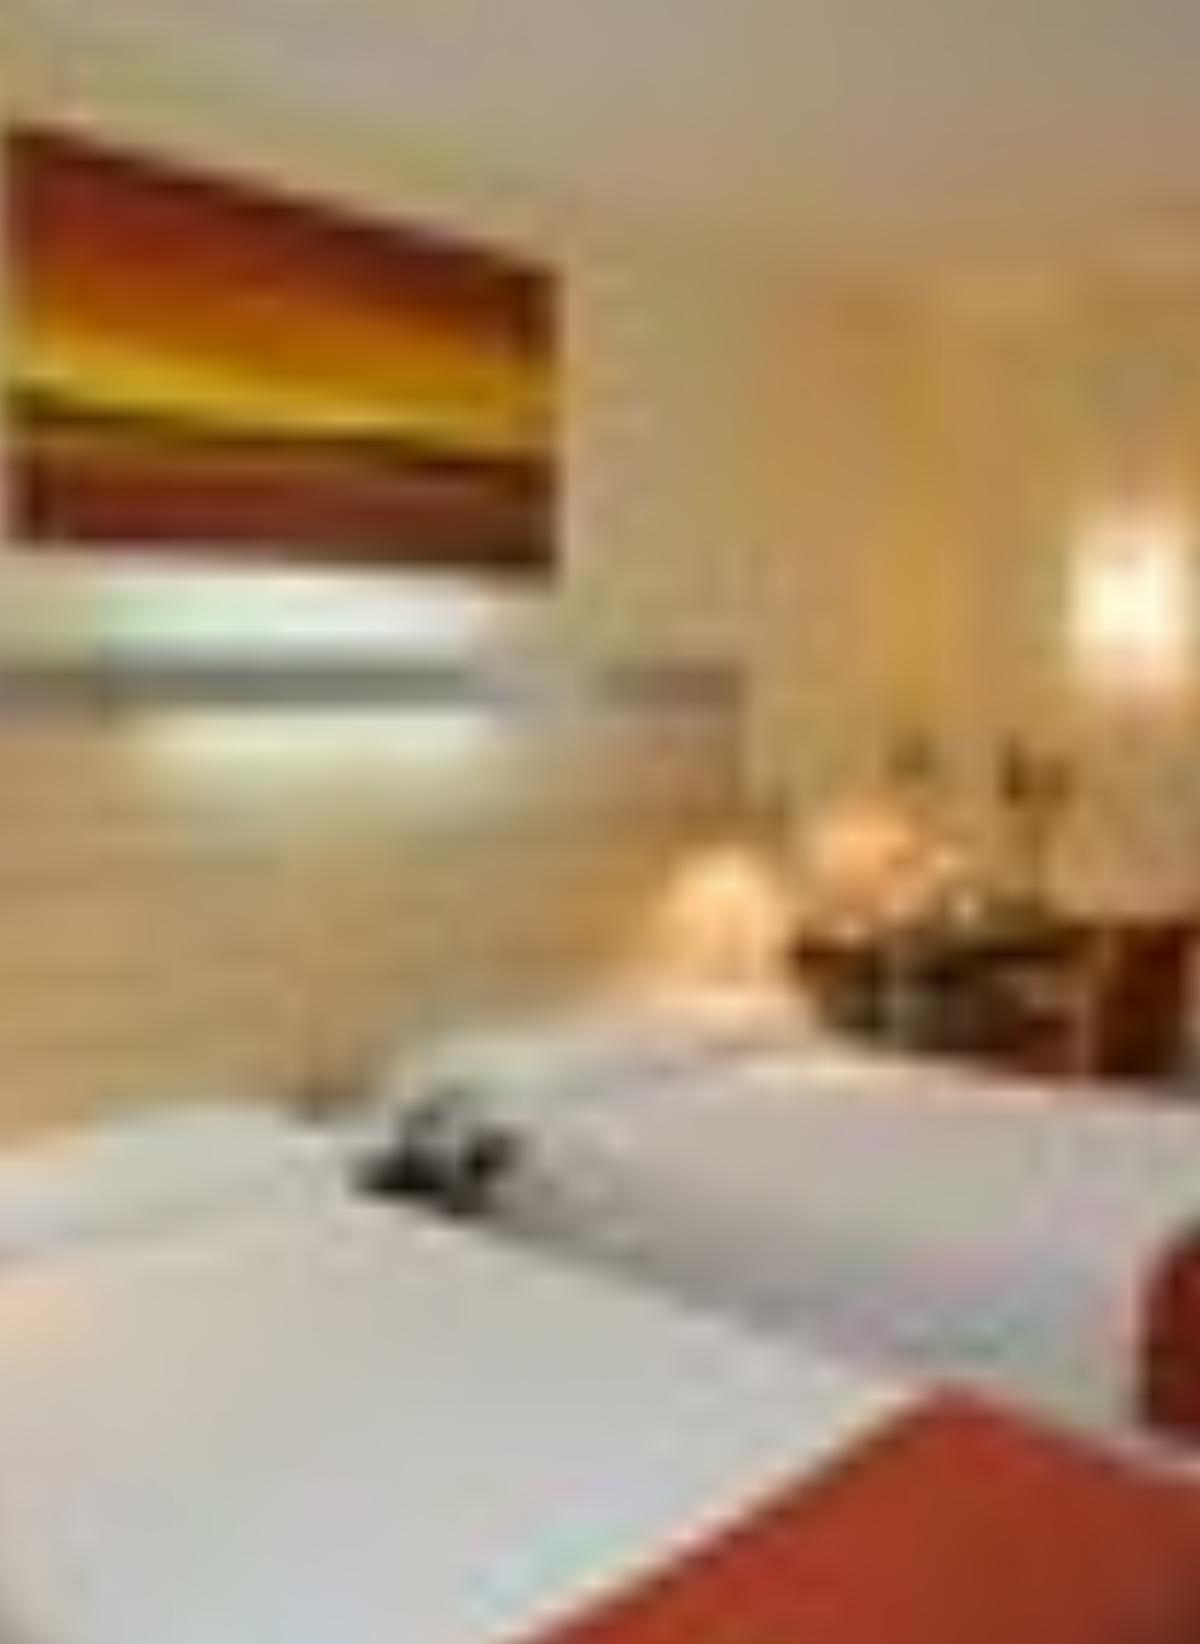 Express By Holiday Inn Alcorcon Hotel Madrid Spain